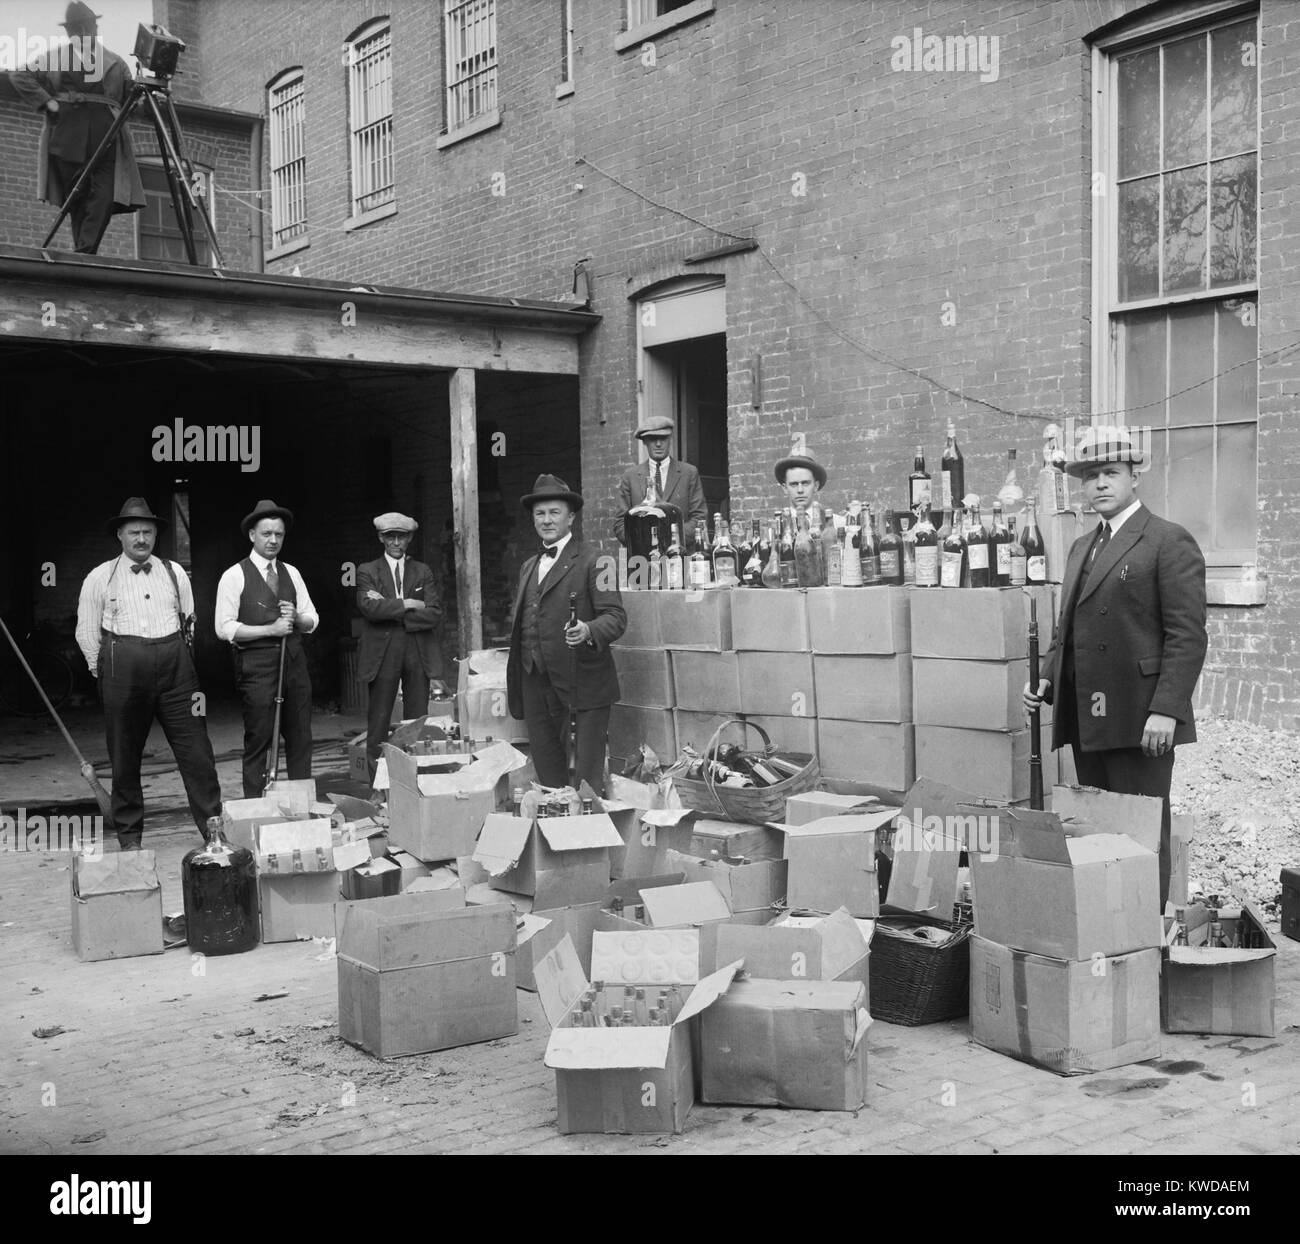 Prohibition agents stand with boxes and bottles of wine and liquor after a raid in Wash. D.C. area. Oct. 14, 1922. Note the camera man in upper left (BSLOC 2016 8 69) Stock Photo